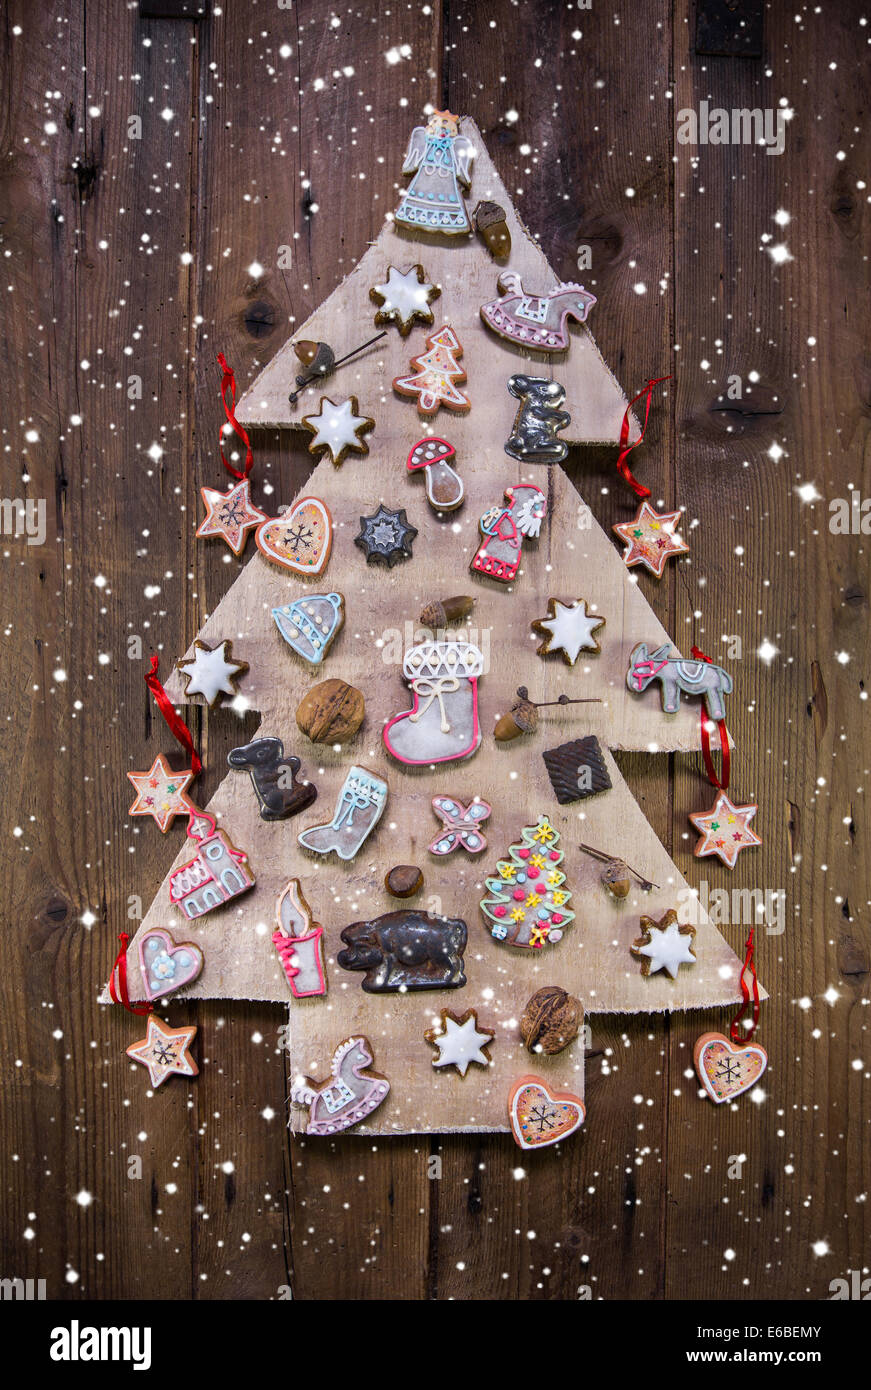 Handmade carved christmas tree decorated with gingerbread, stars and hearts on wooden background. Stock Photo